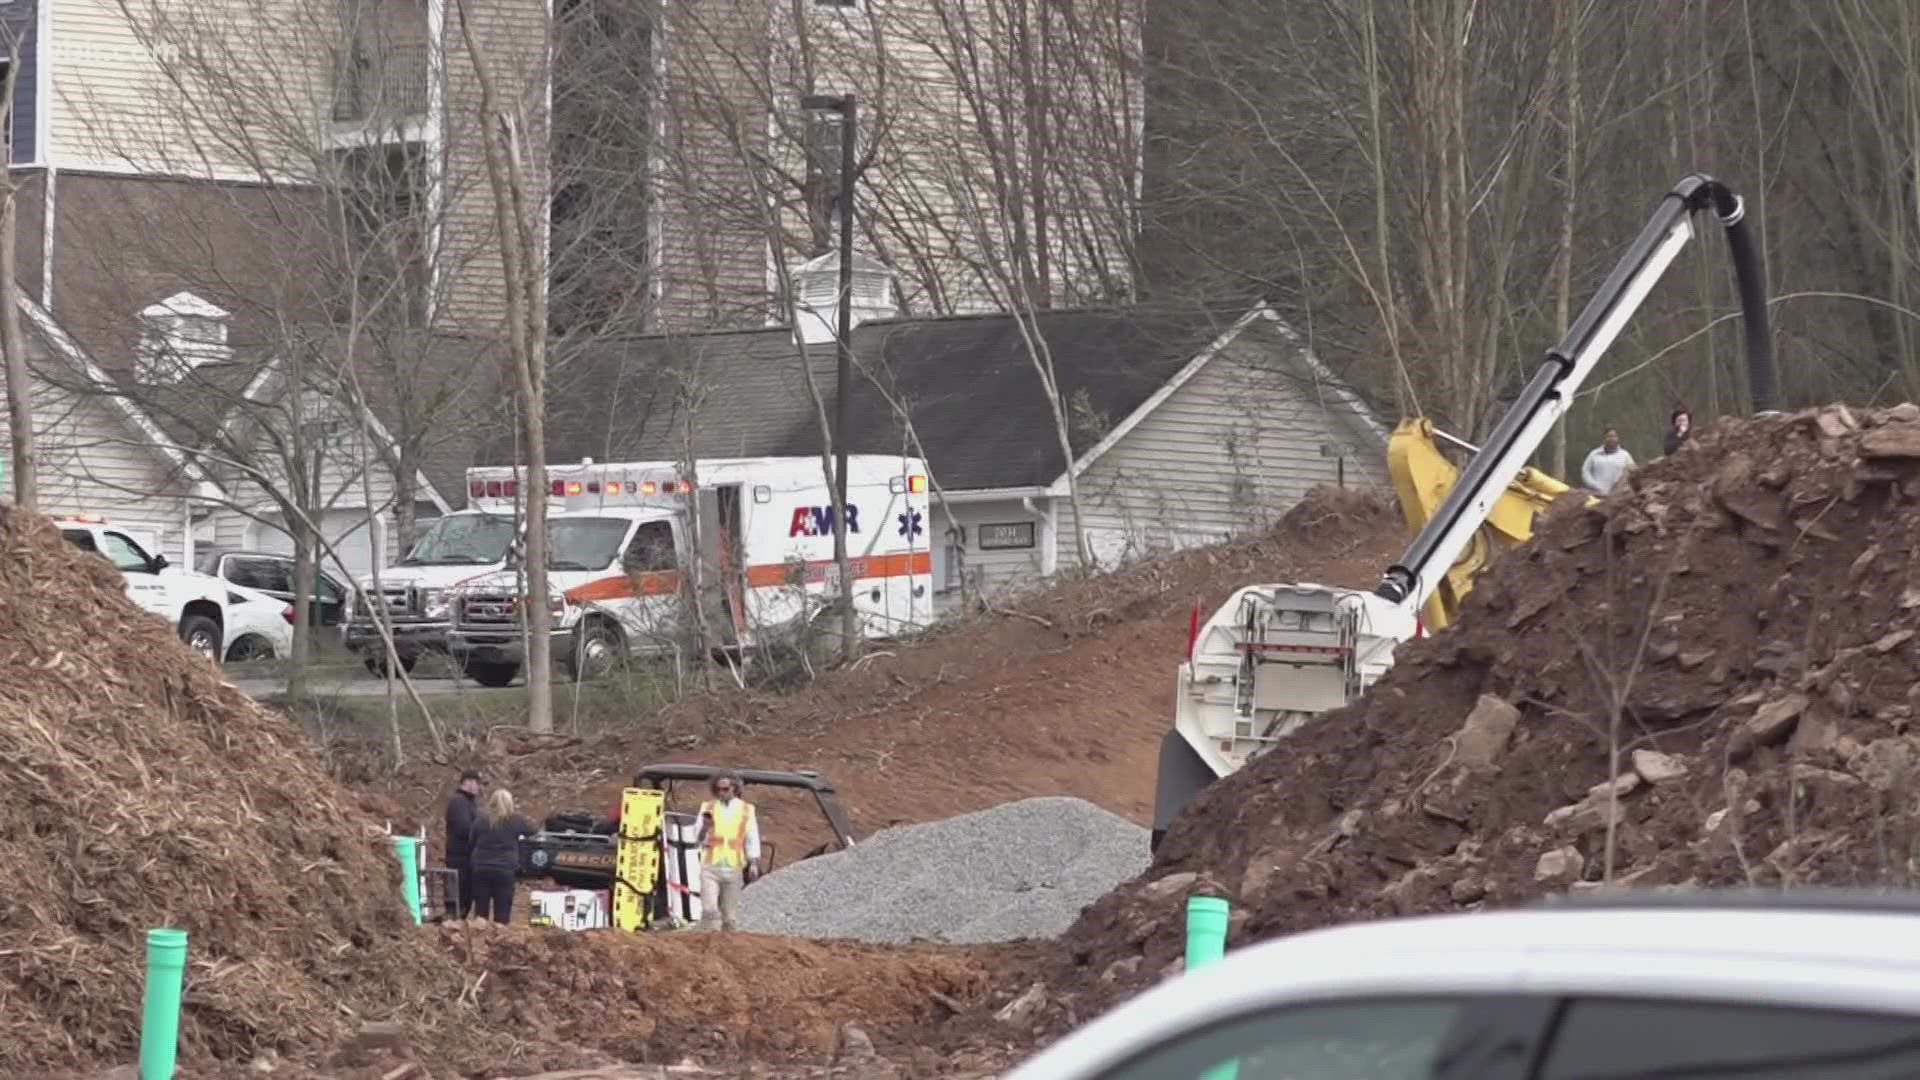 Rural Metro said the collapse happened at East Beaver Creek Drive near Allison Way Thursday.